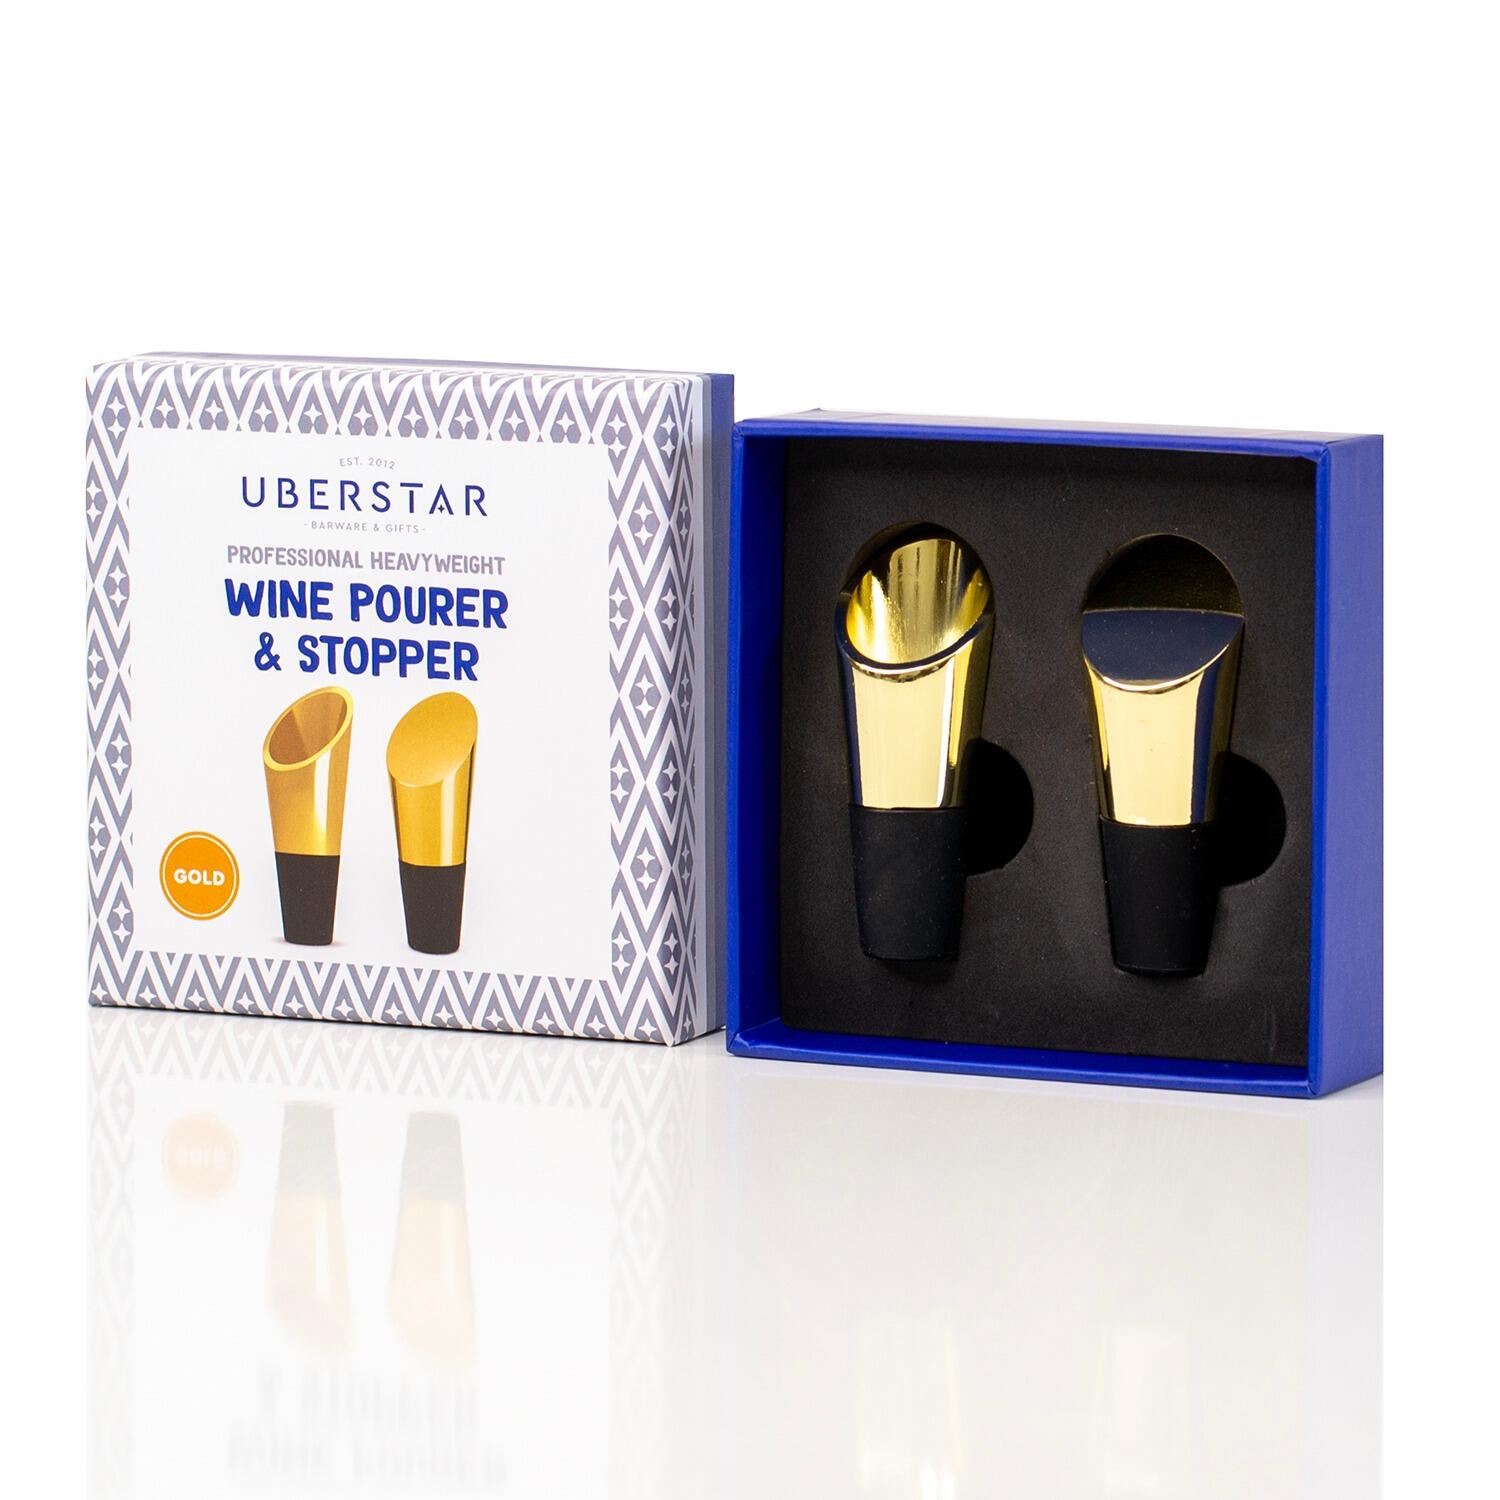 UBERSTAR Heavyweight Wine Pourer and Stopper - Gold